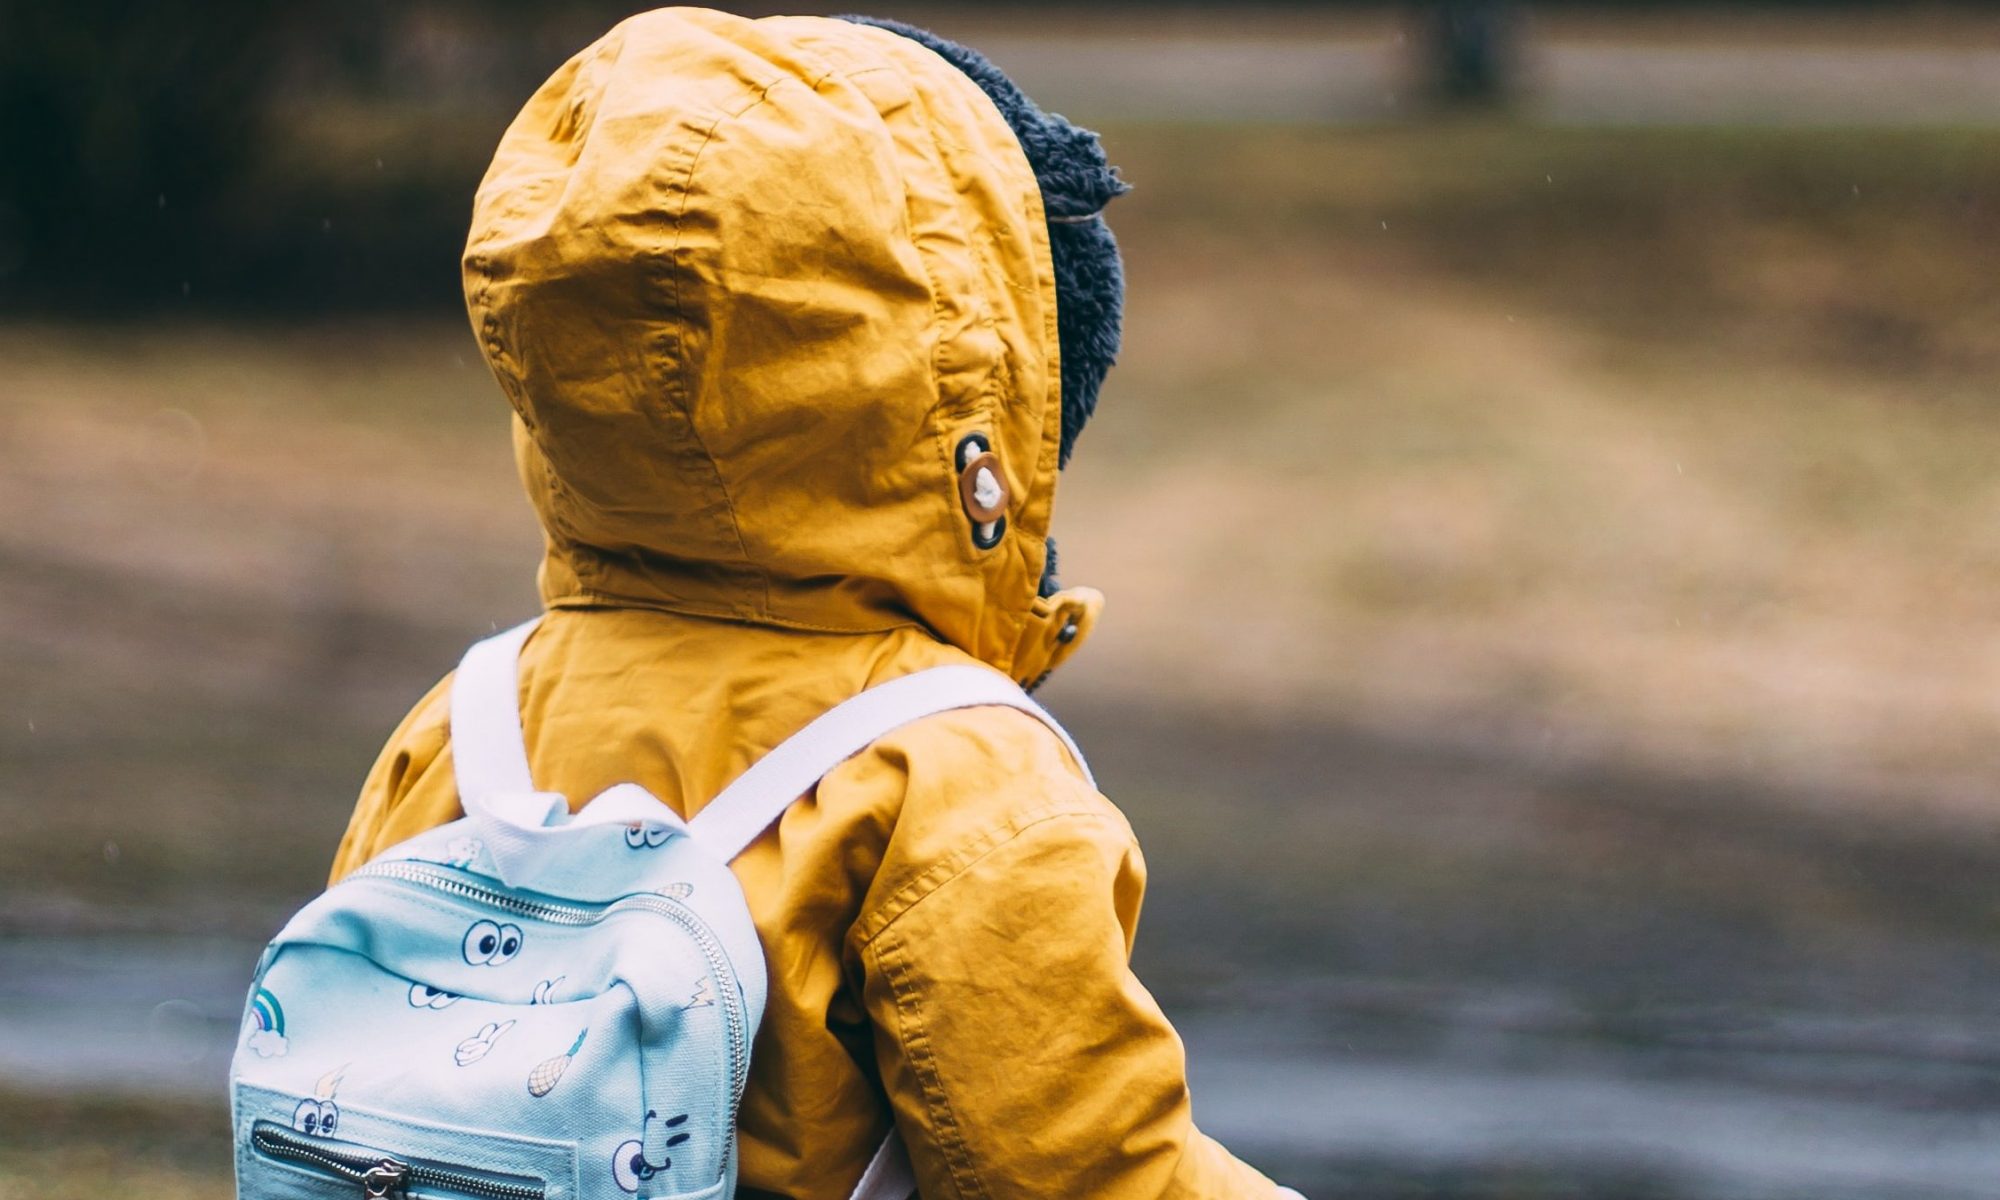 small-child-in-yellow-raincoat-with-blue-backpack-walks-across-grass-photo-by-daiga-ellaby-on-unsplash